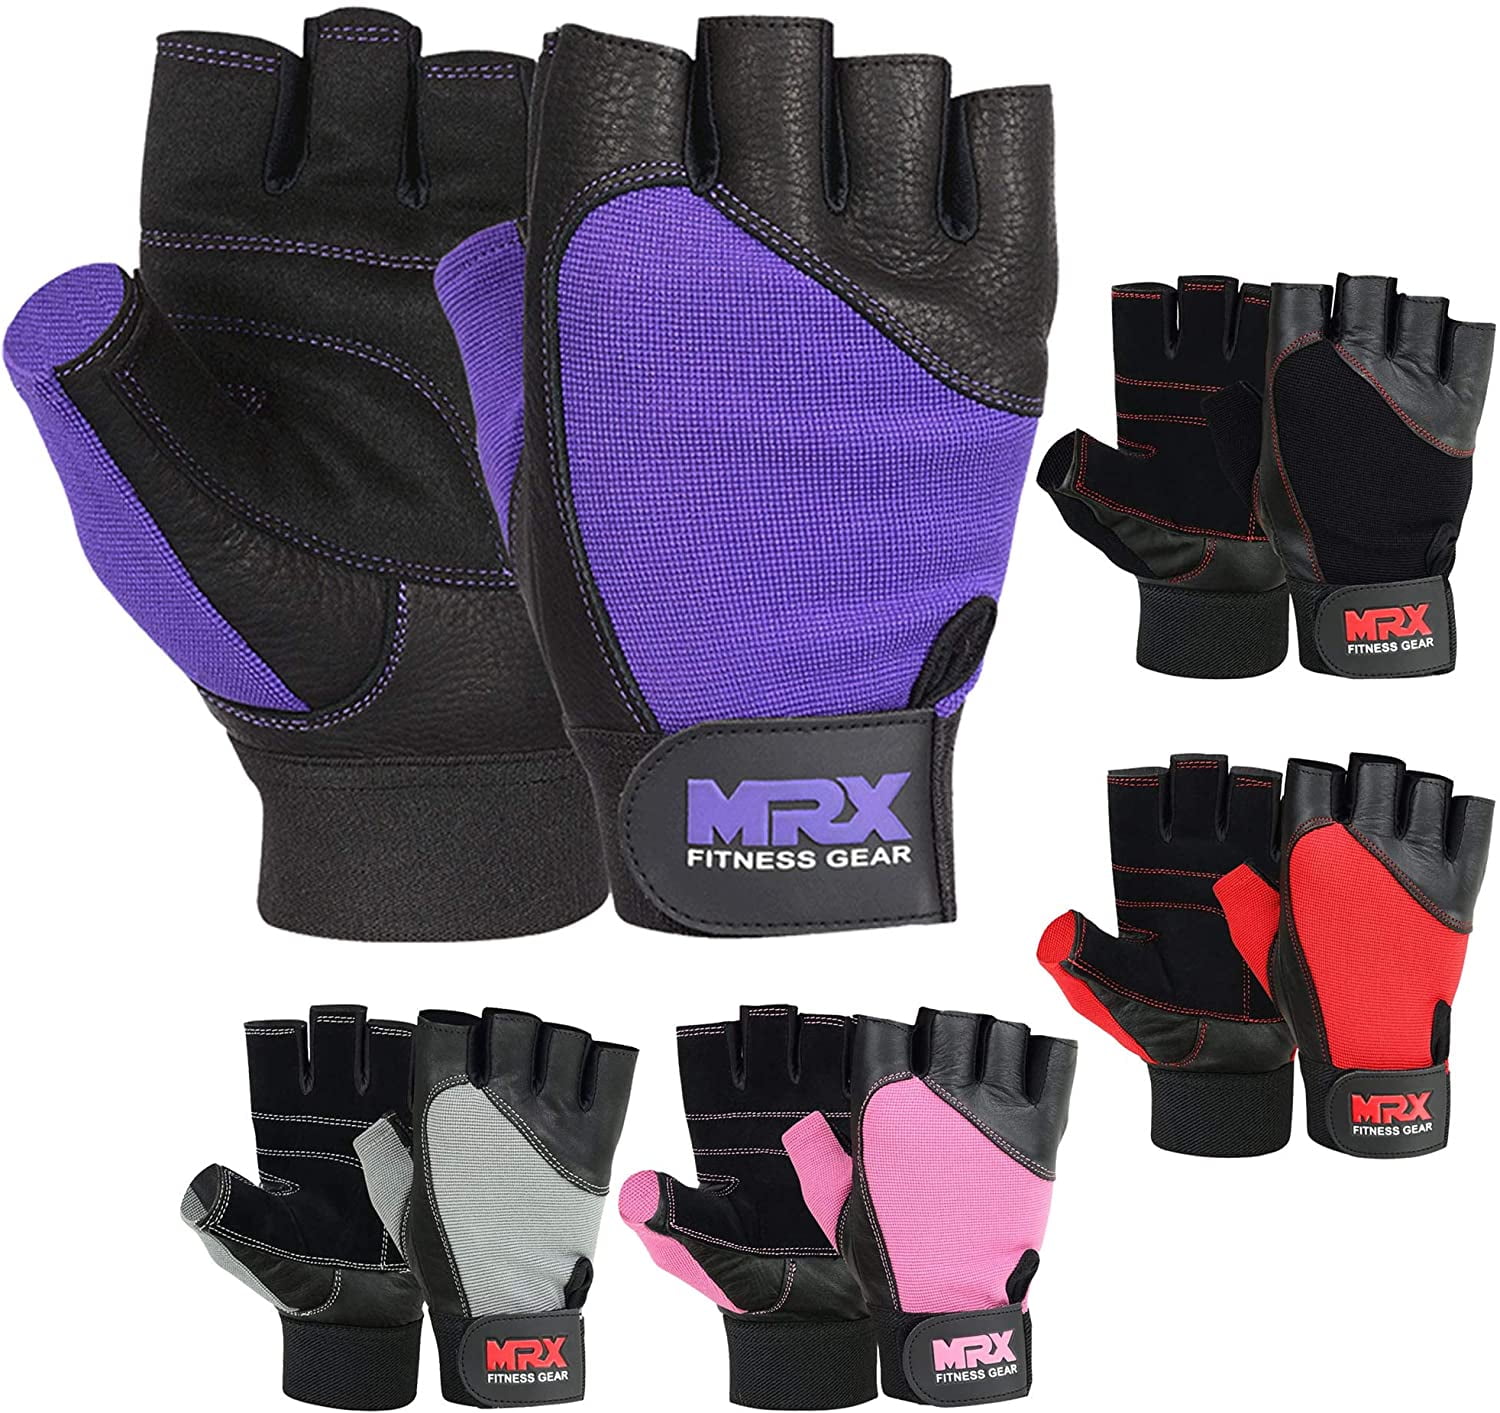 GYM FITNESS GLOVES WOMEN WEIGHT LIFTING BODYBUILDING TRAINING WORKOUT